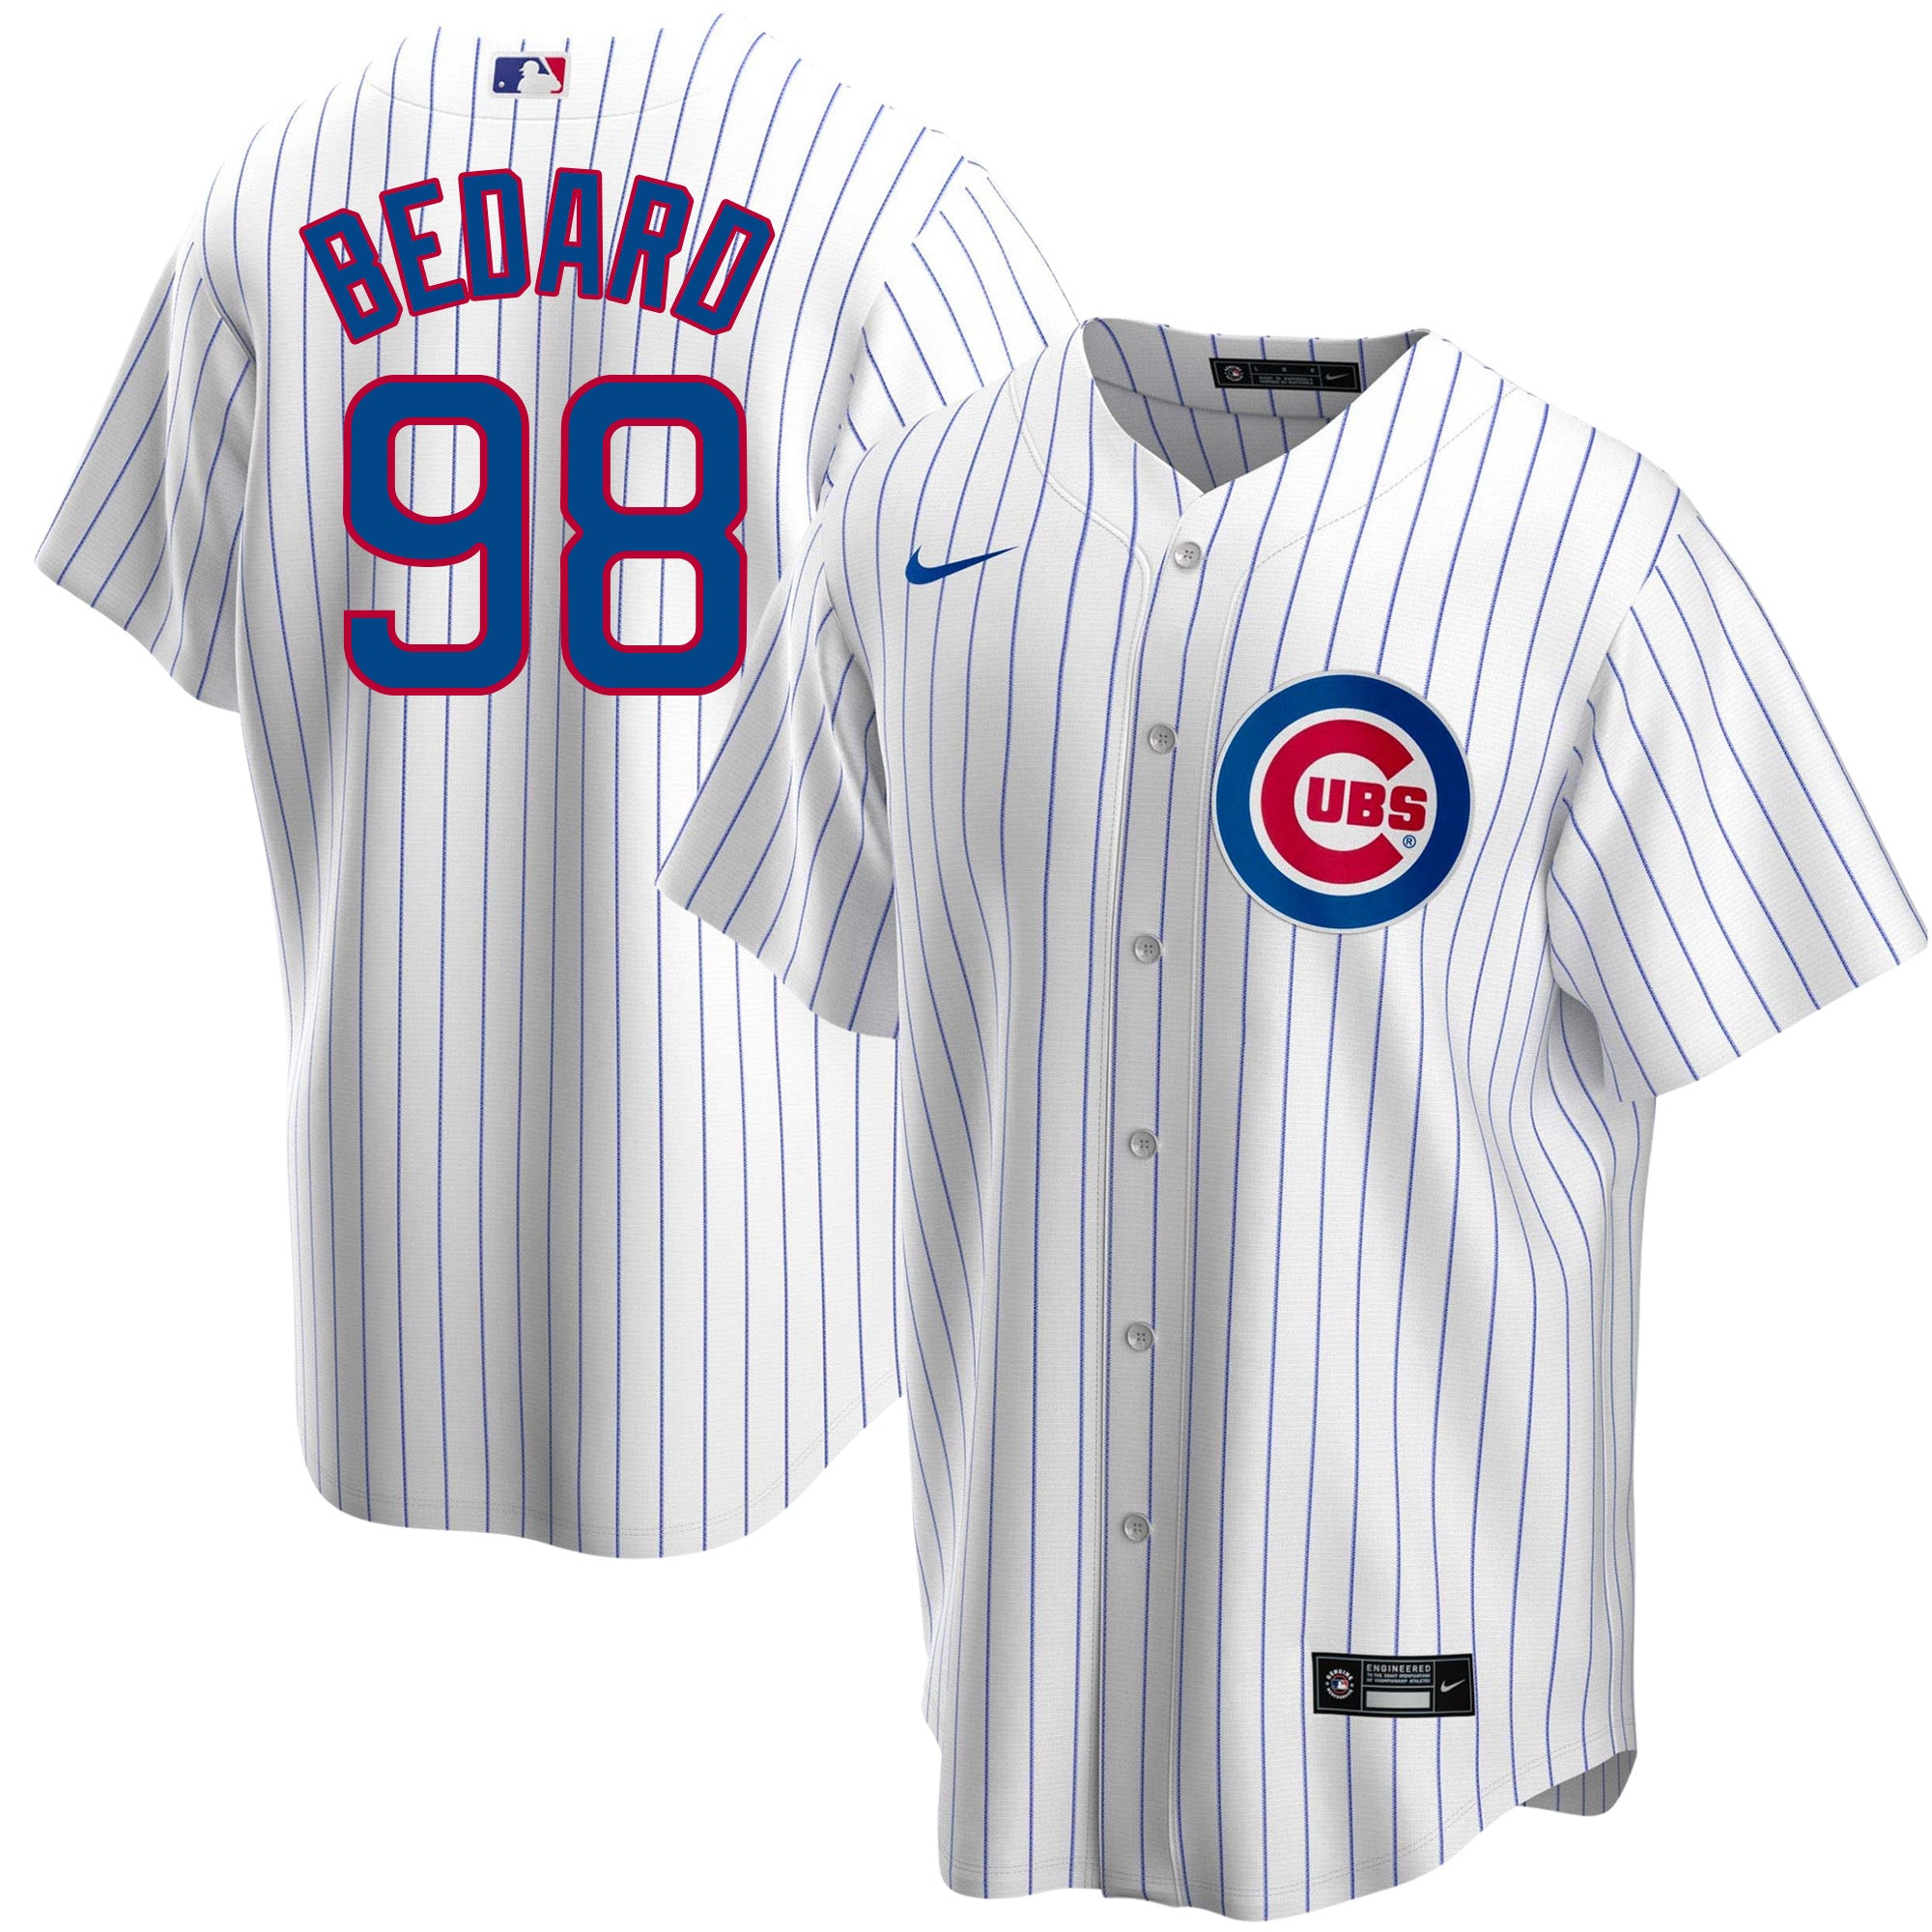 Connor Bedard Chicago Blackhawks Chicago Cubs Crossover Nike Home